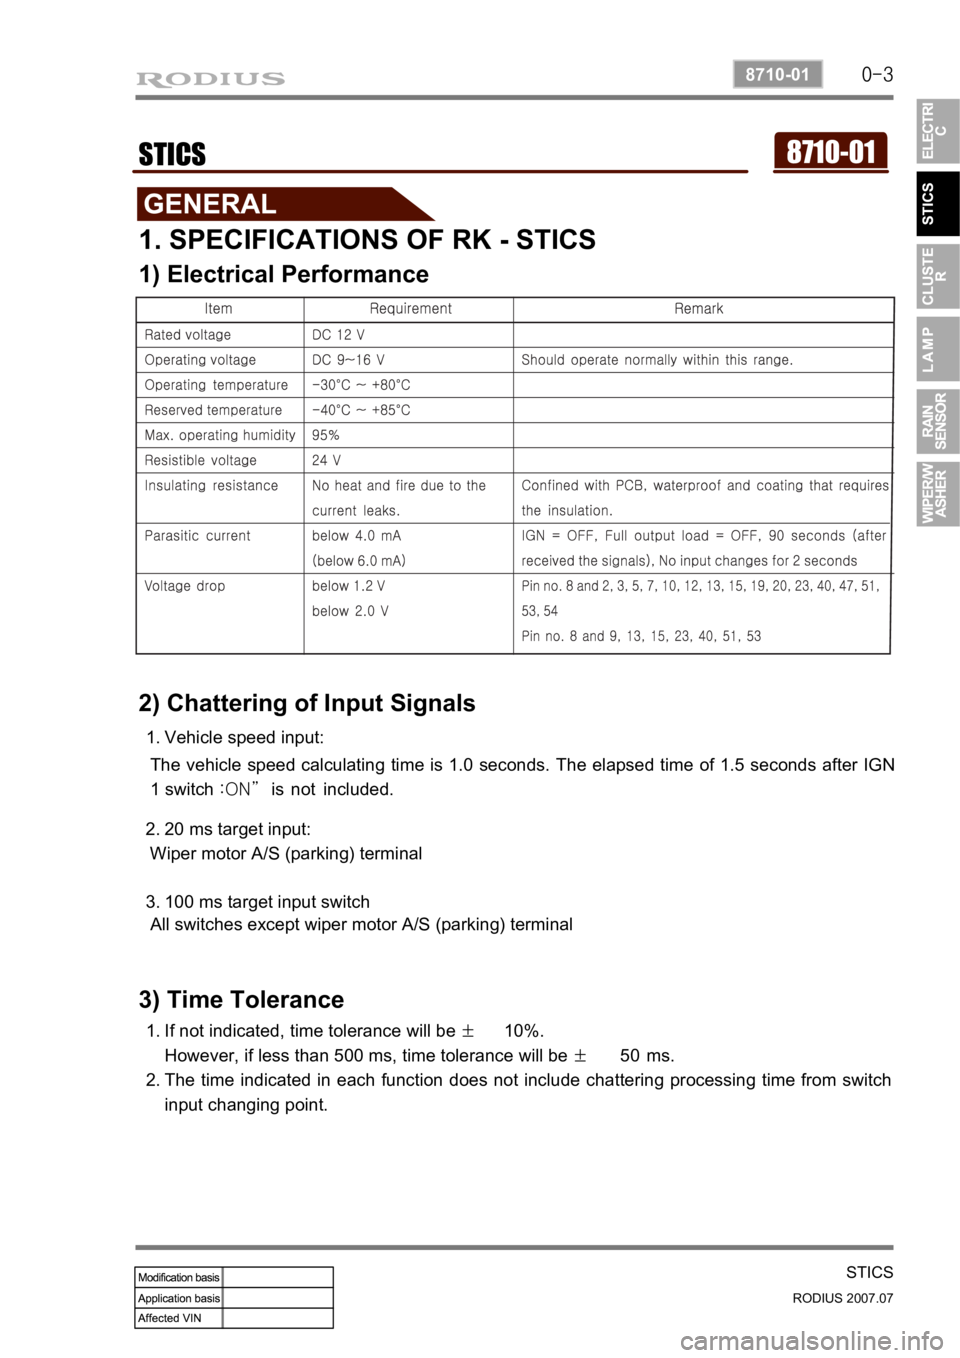 SSANGYONG RODIUS 2006  Service Manual 0-3
STICS
RODIUS 2007.07
8710-01
8710-01STICS
1. SPECIFICATIONS OF RK - STICS
1) Electrical Performance
2) Chattering of Input Signals
Vehicle speed input: 1.
3) Time Tolerance
If not indicated, time 